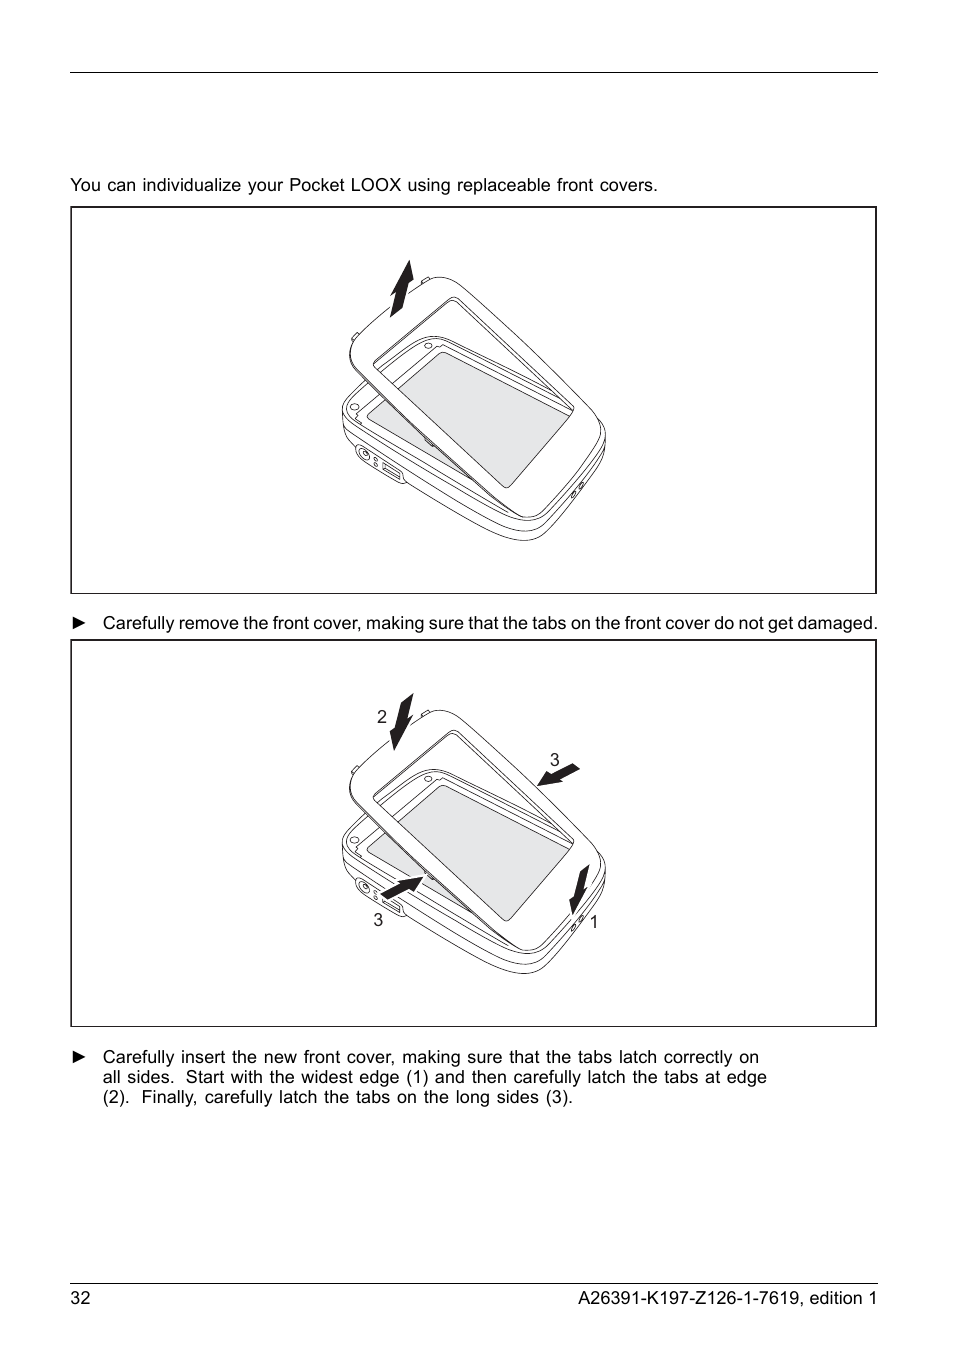 Changing the front cover | Navigon POCKET LOOX N100 User Manual | Page 40 / 48